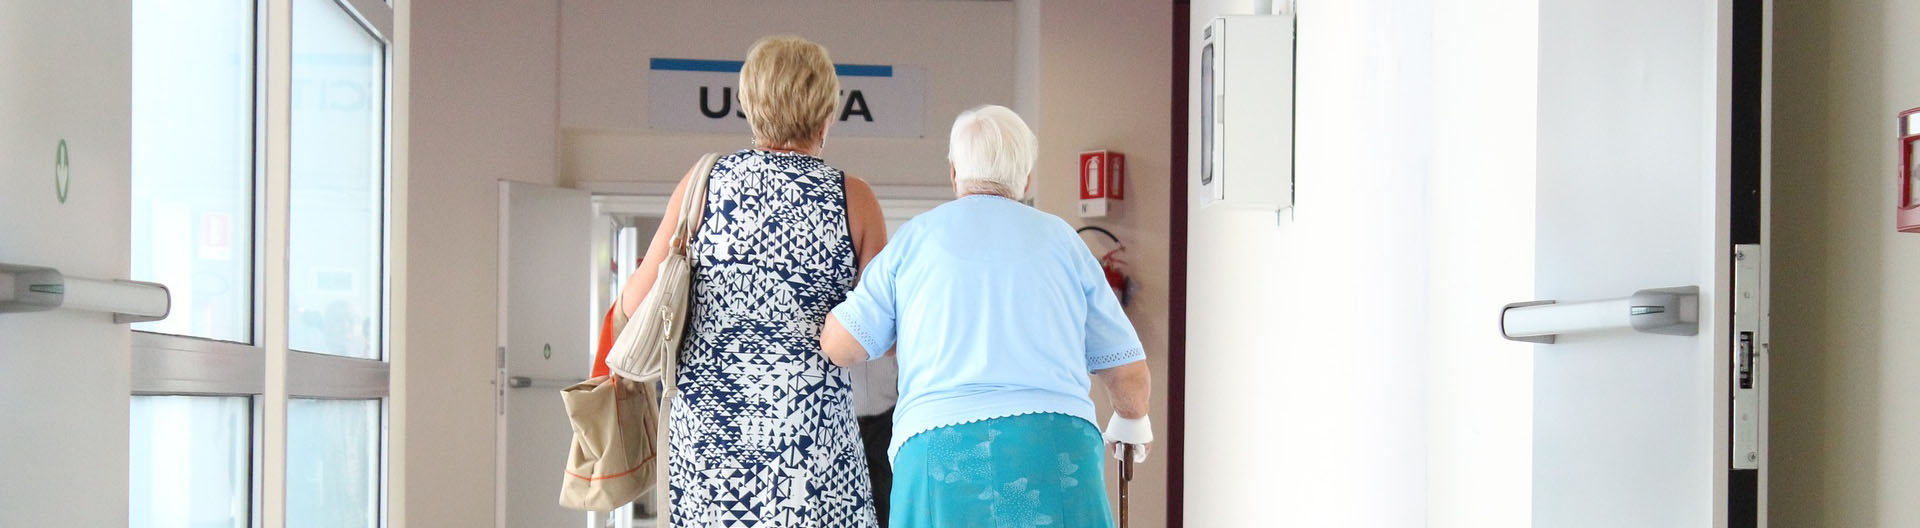 An older woman walks her elderly mother through the bright hallway of a medical facility